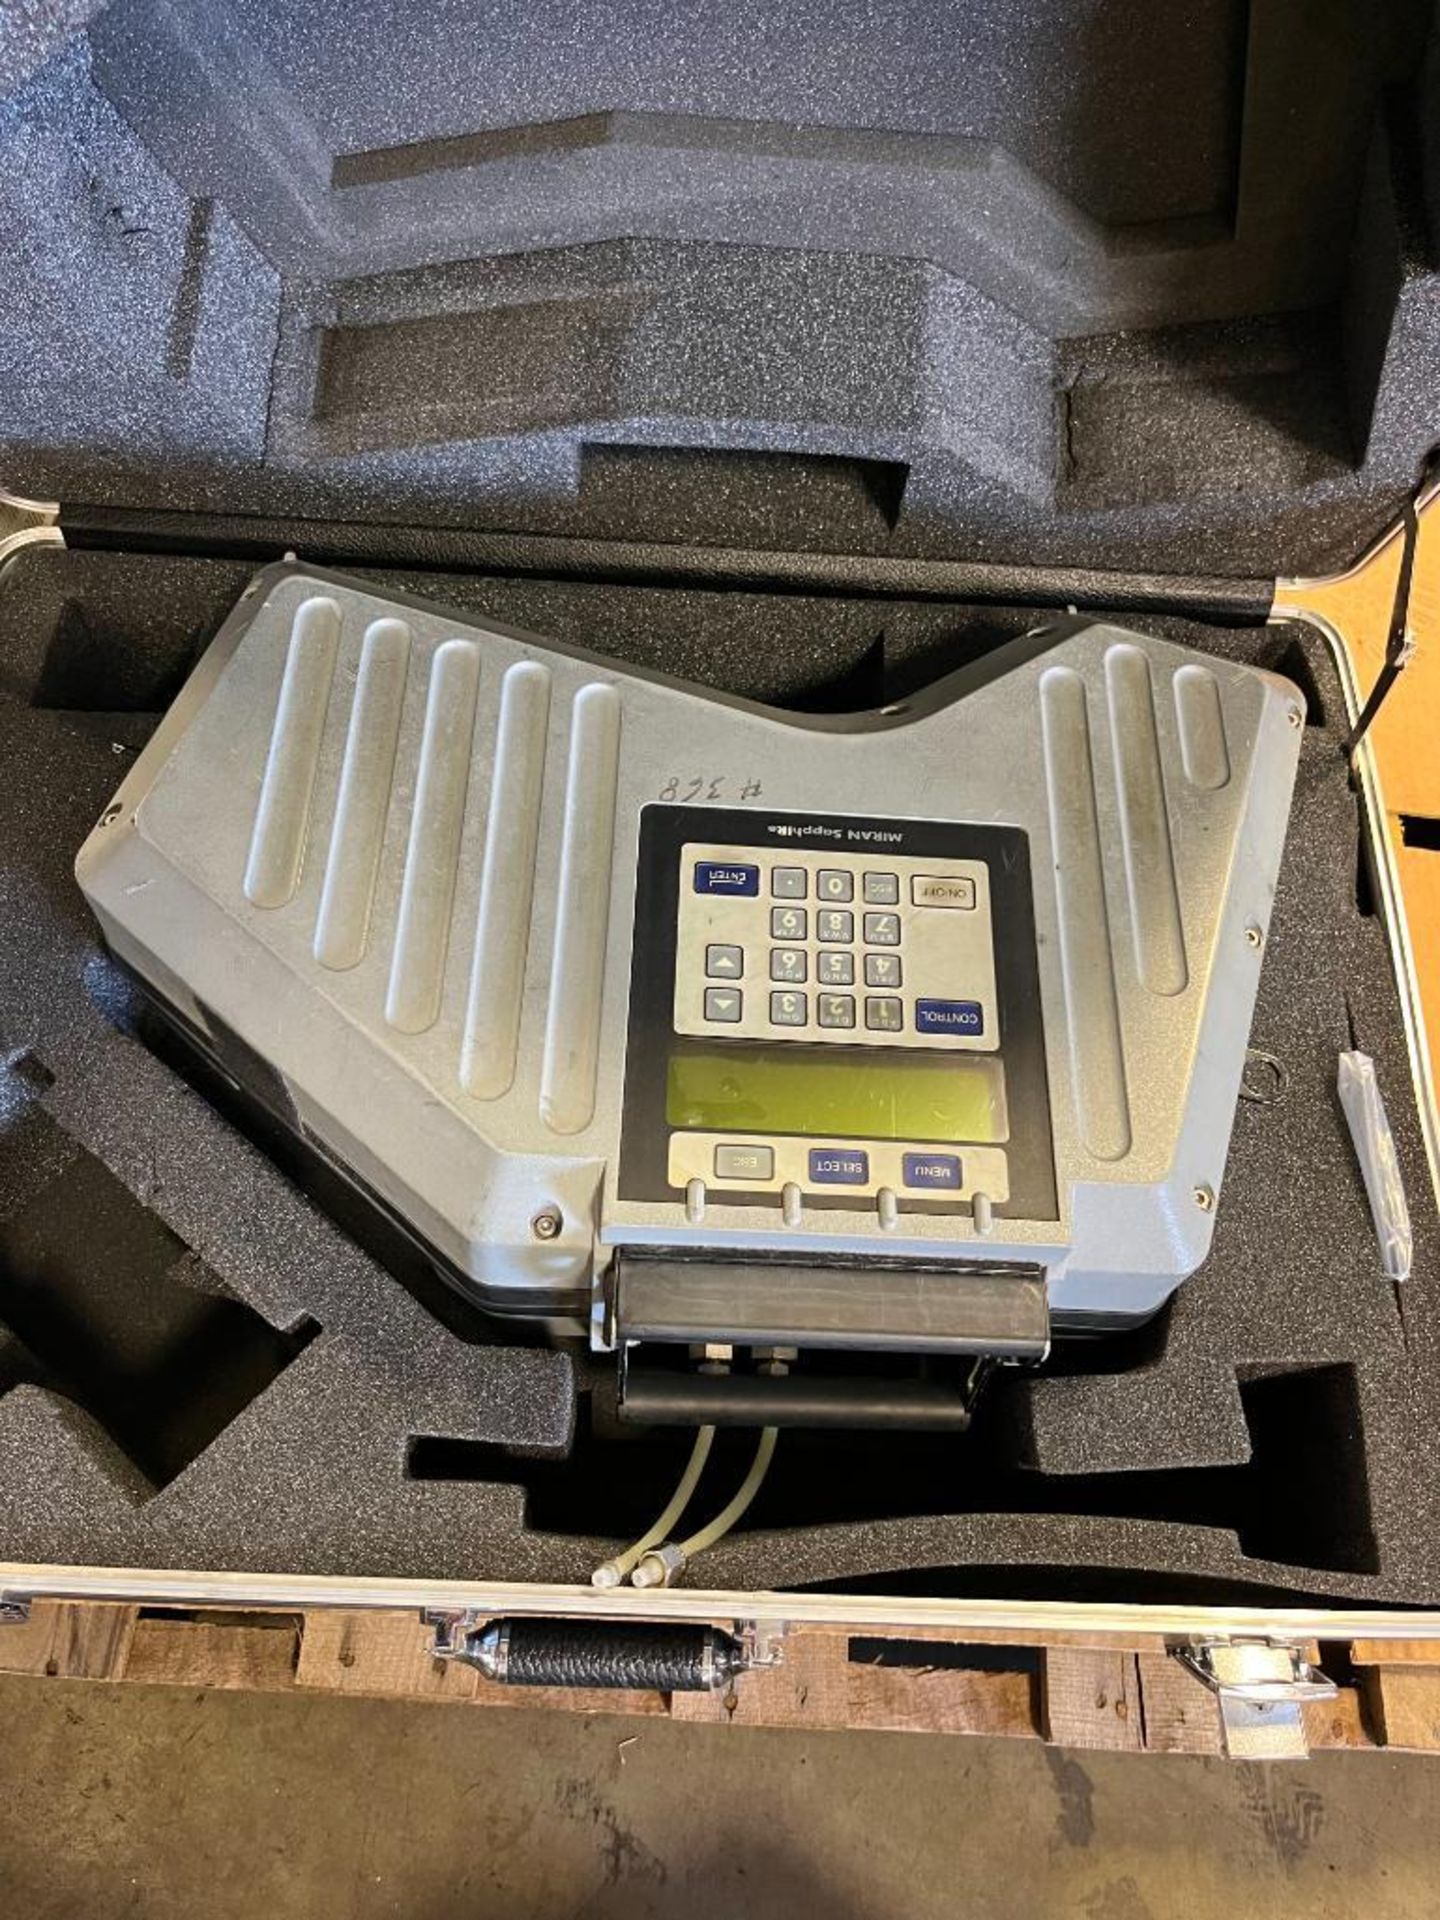 Thermo Scientific Miran Sapphire Ambient Air Analyzer, Model 82010//82040/32060, S/N 205B-70310-368 - Image 2 of 6